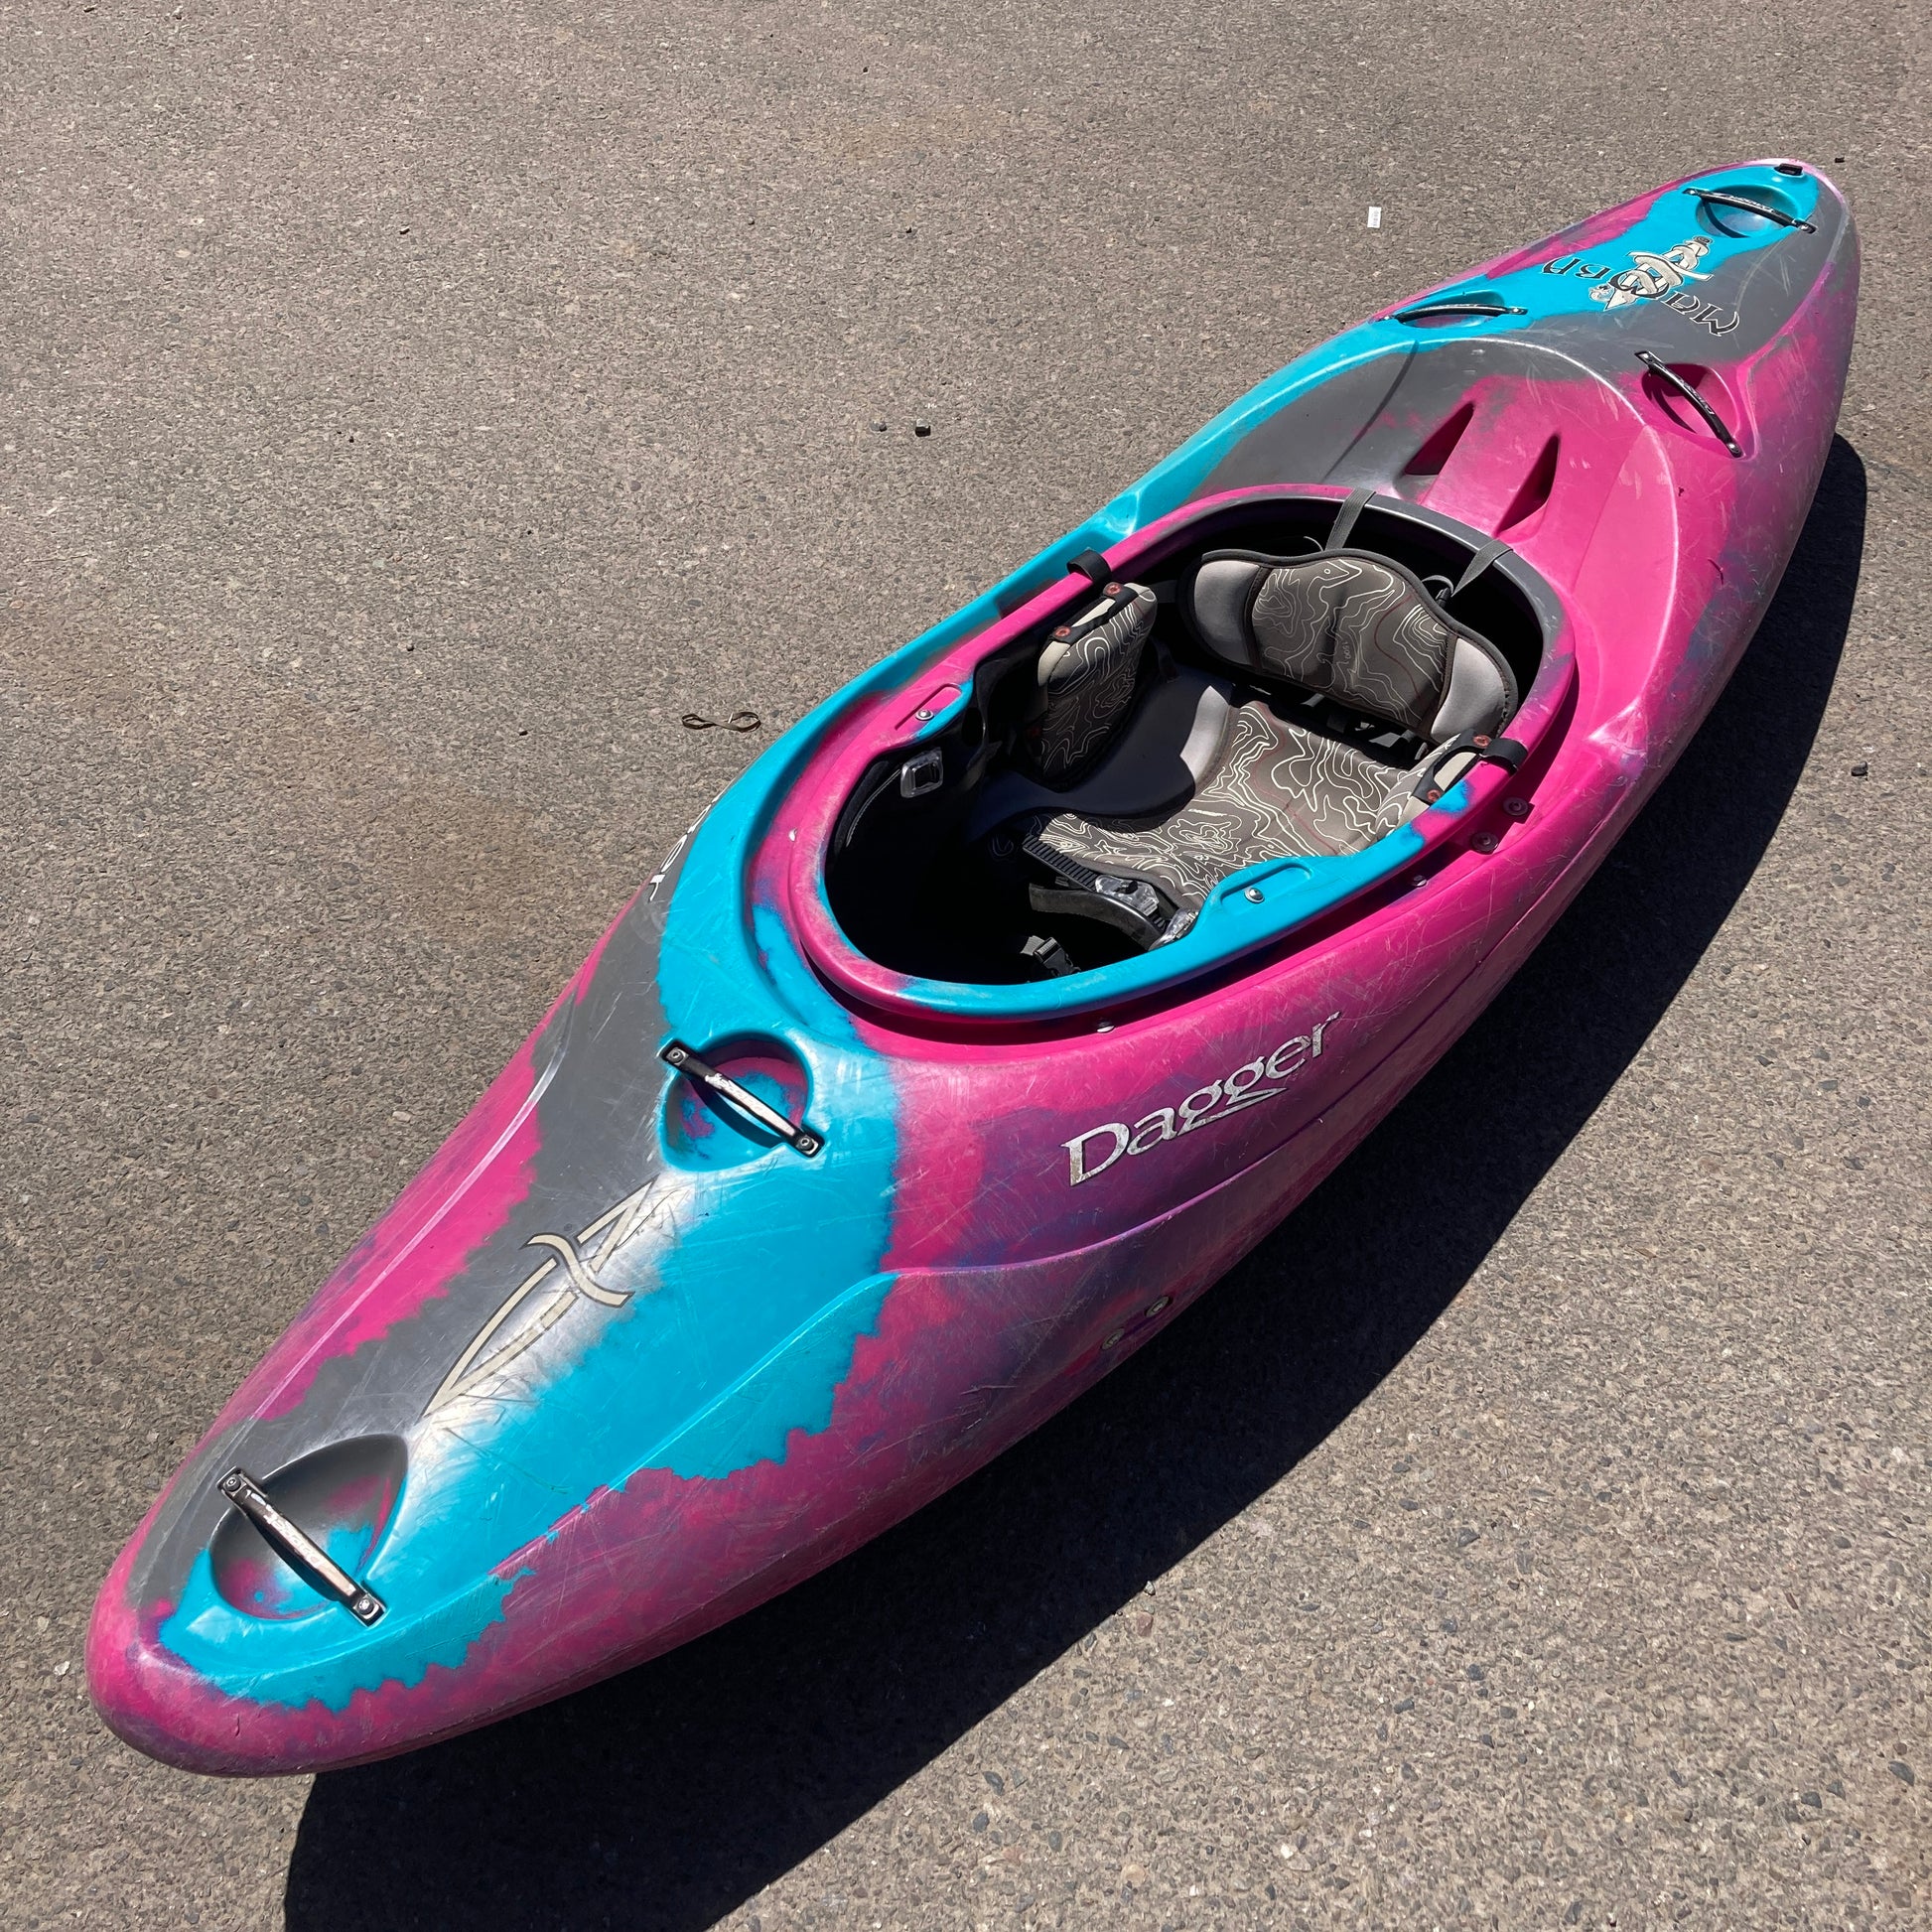 A vibrant pink and blue Dagger Mamba 7.6 kayak with the brand "Dagger Mamba 7.6" on its side, resting on an asphalt surface in sunlight.